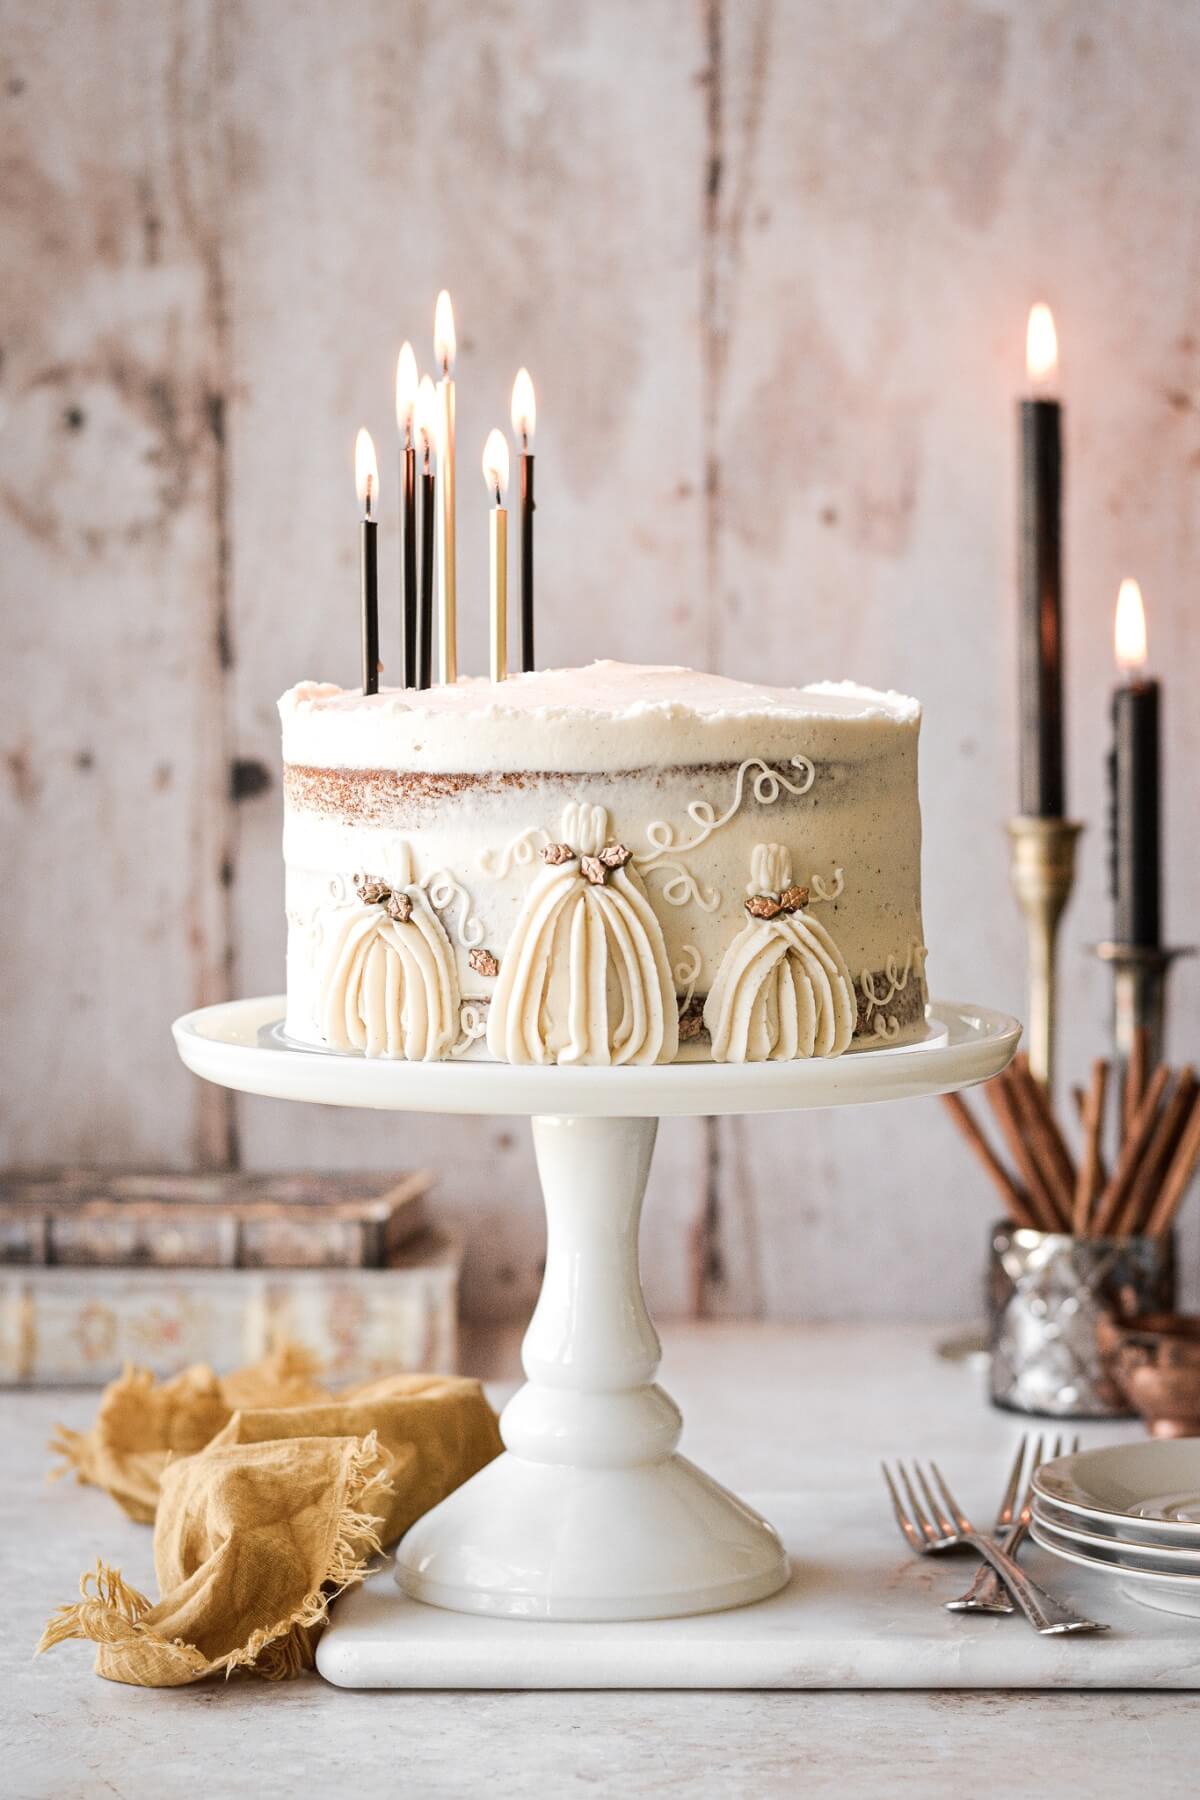 Pumpkin cake with buttercream pumpkins and black and gold birthday candles.